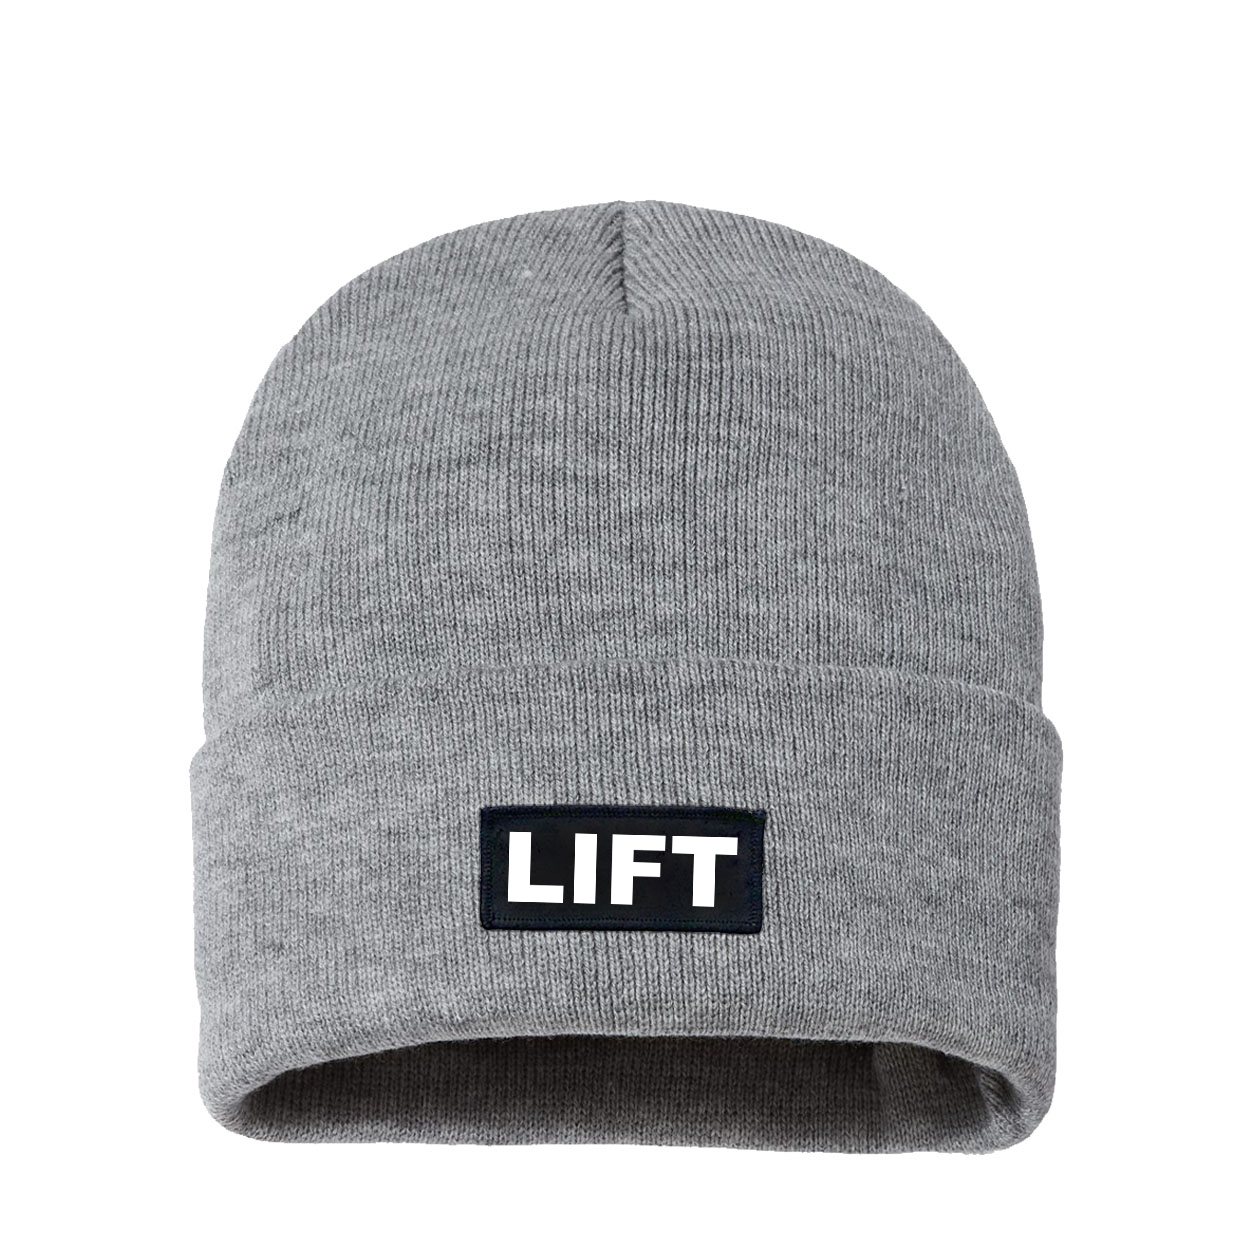 Lift Brand Logo Night Out Woven Patch Sherpa Lined Cuffed Beanie Heather Gray (White Logo)